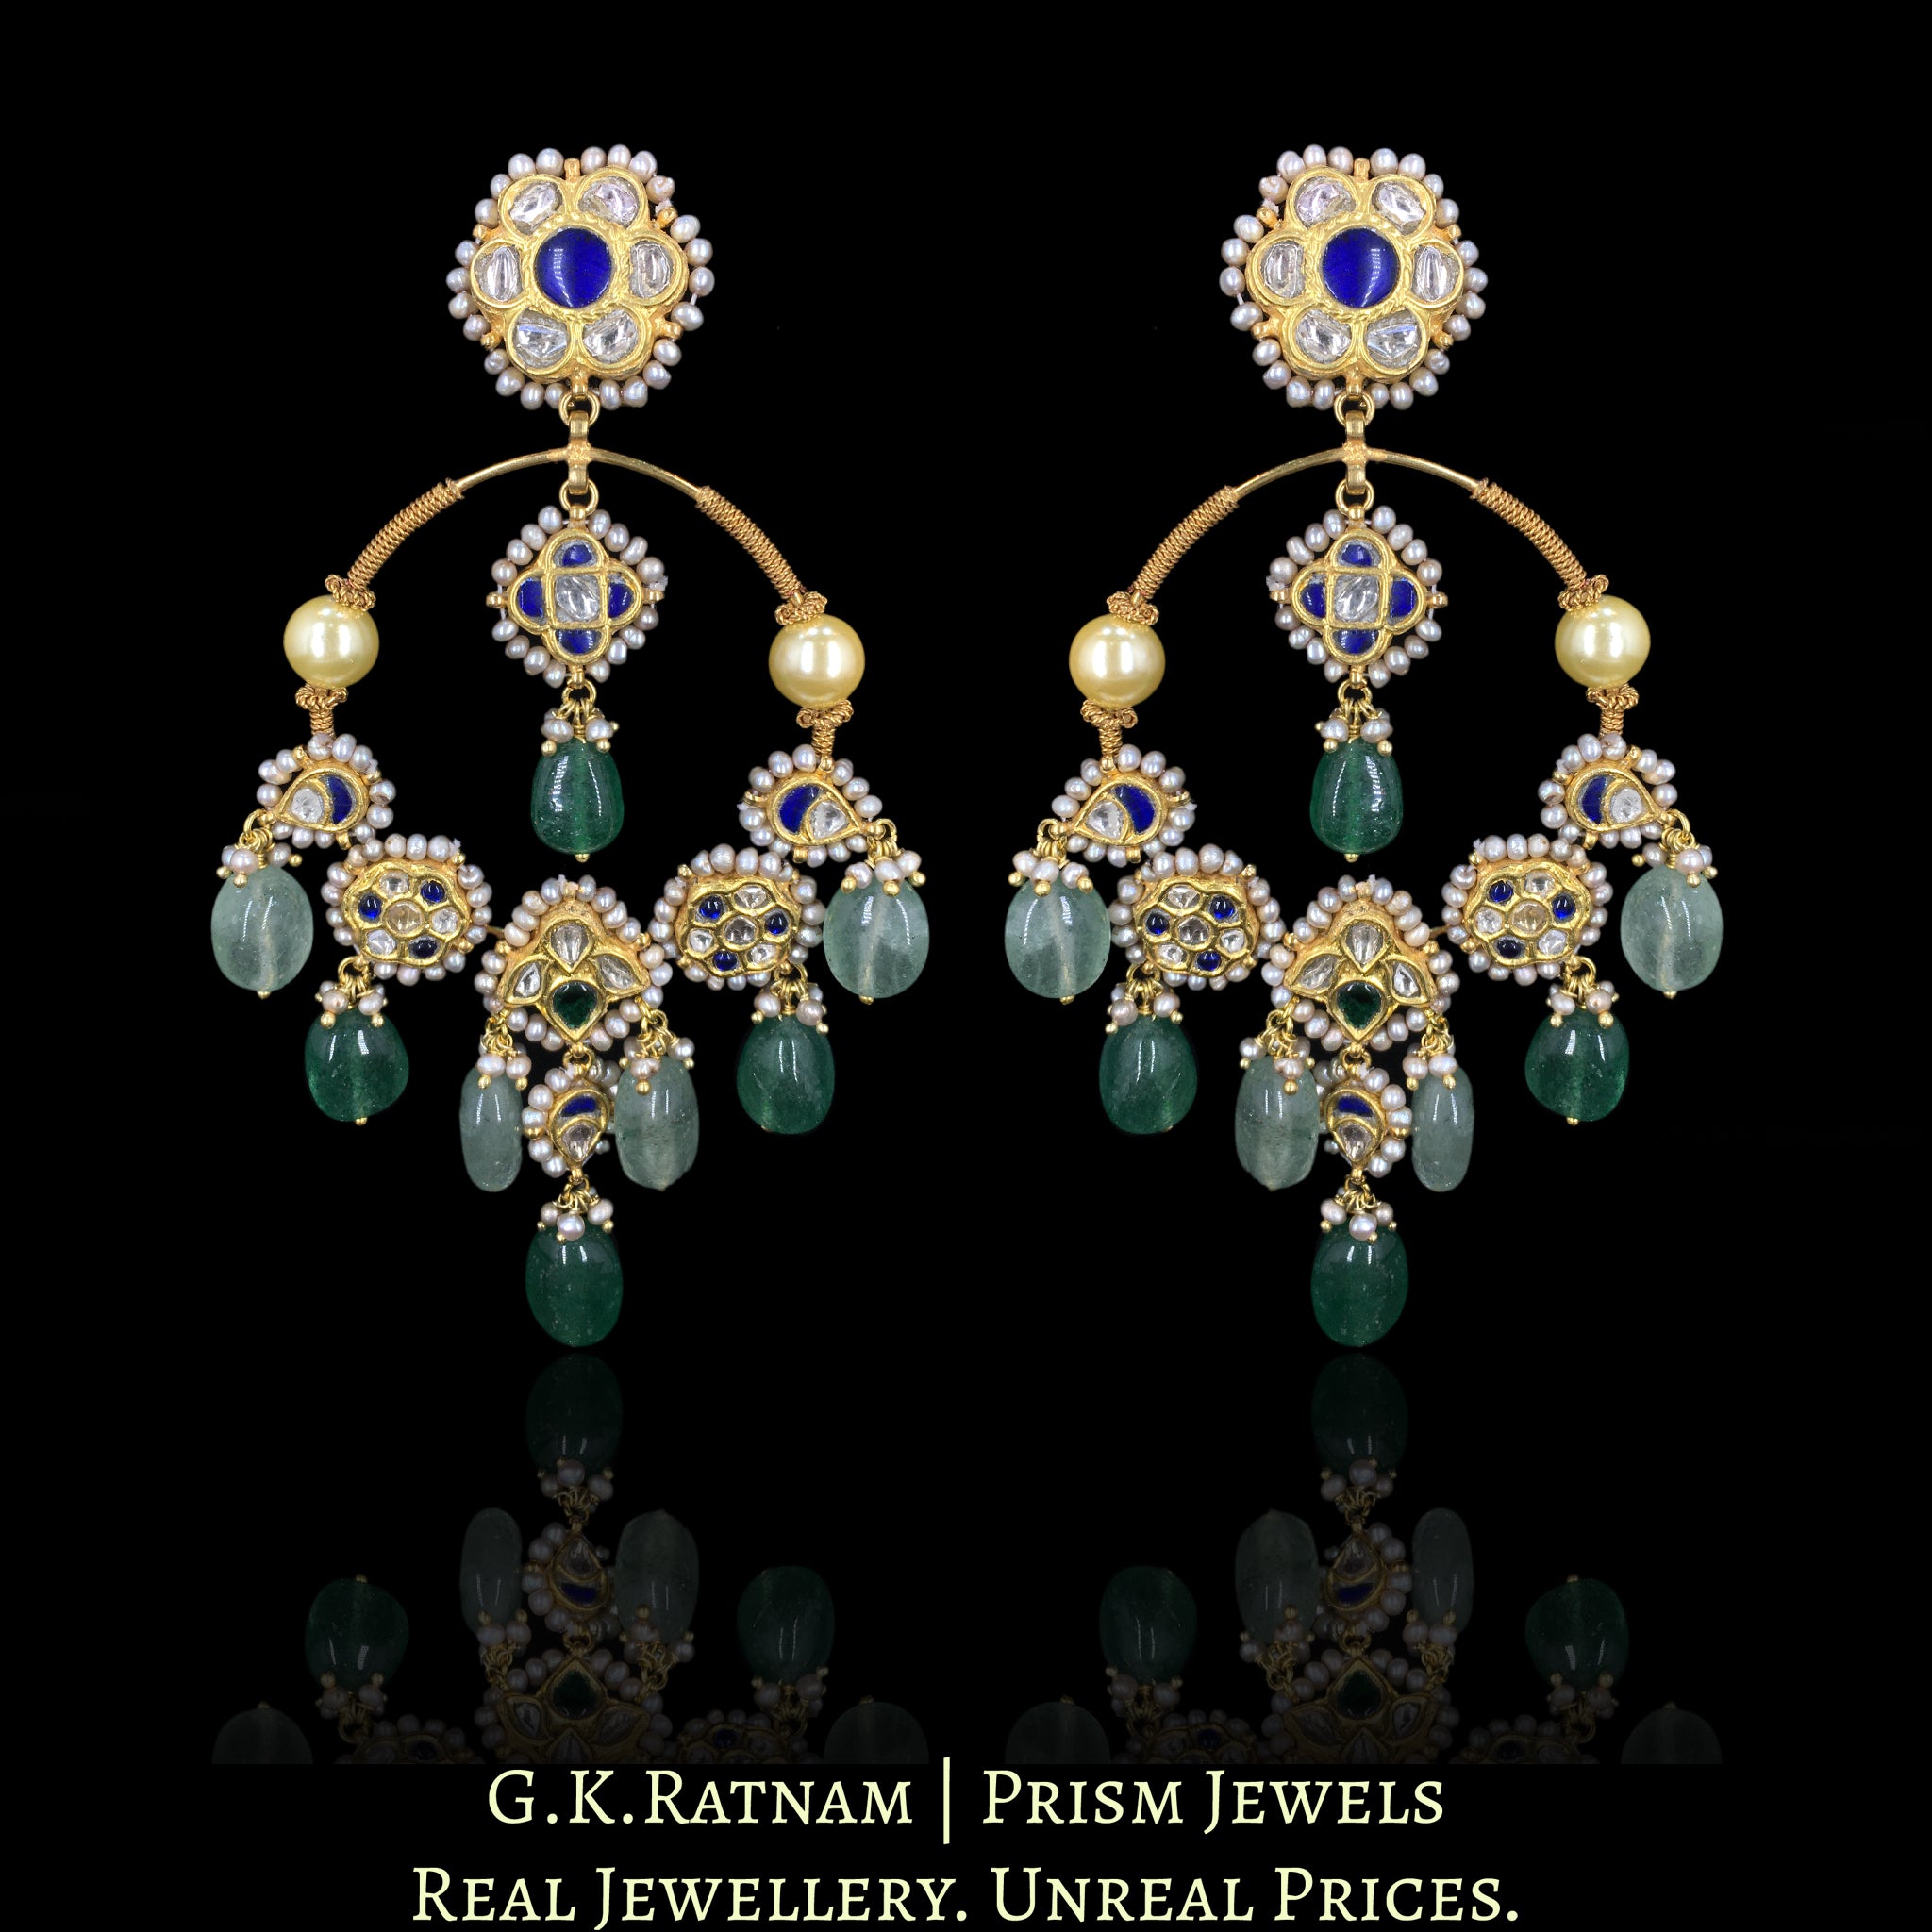 23k Gold and Diamond Polki pipe-style Chand Bali Earring Pair with Antiqued Freshwater Pearls and Strawberry Quartz